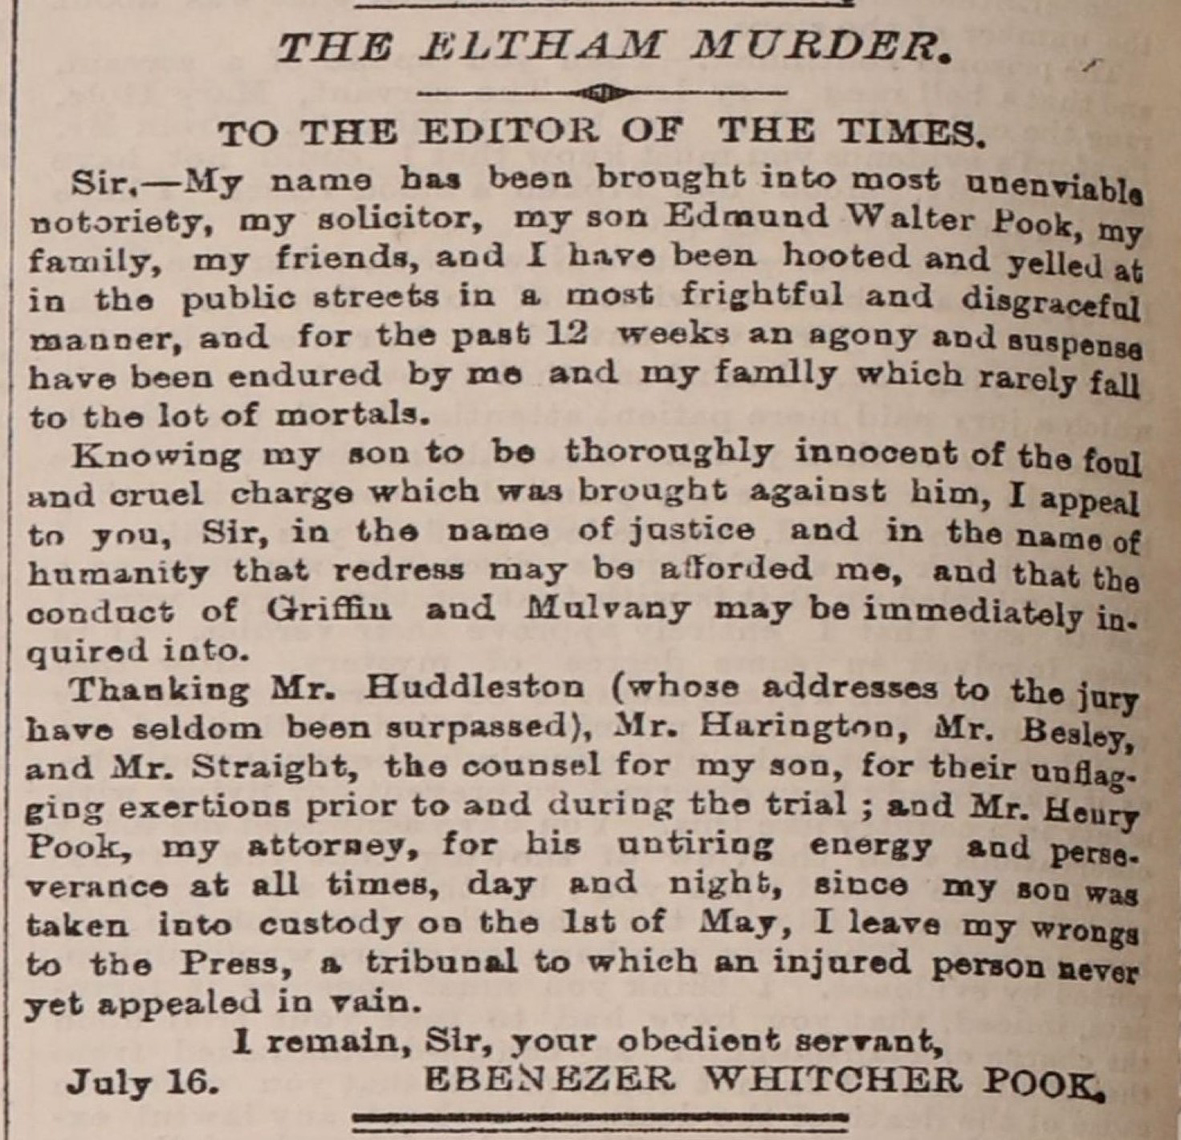 The Times, 13 July 1871